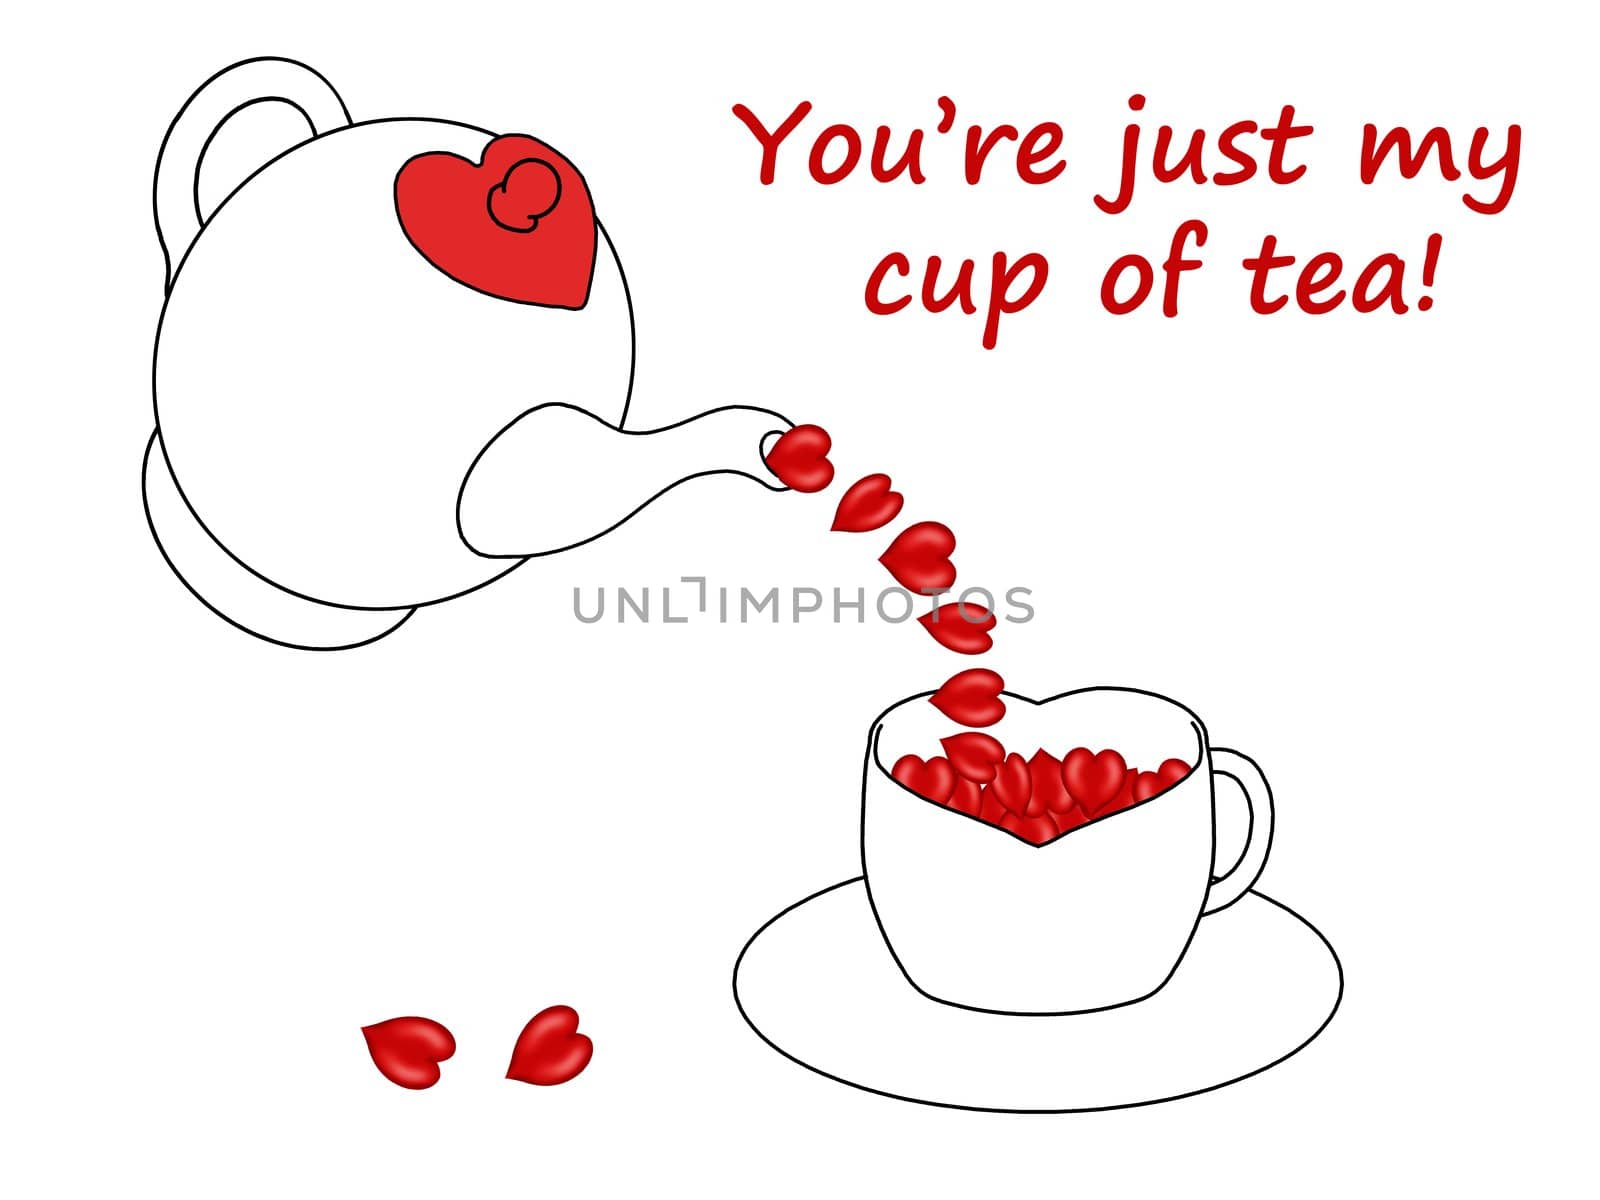 Your just my cup of tea! Teapot pouring red hearts into a teacup isolated on a white background